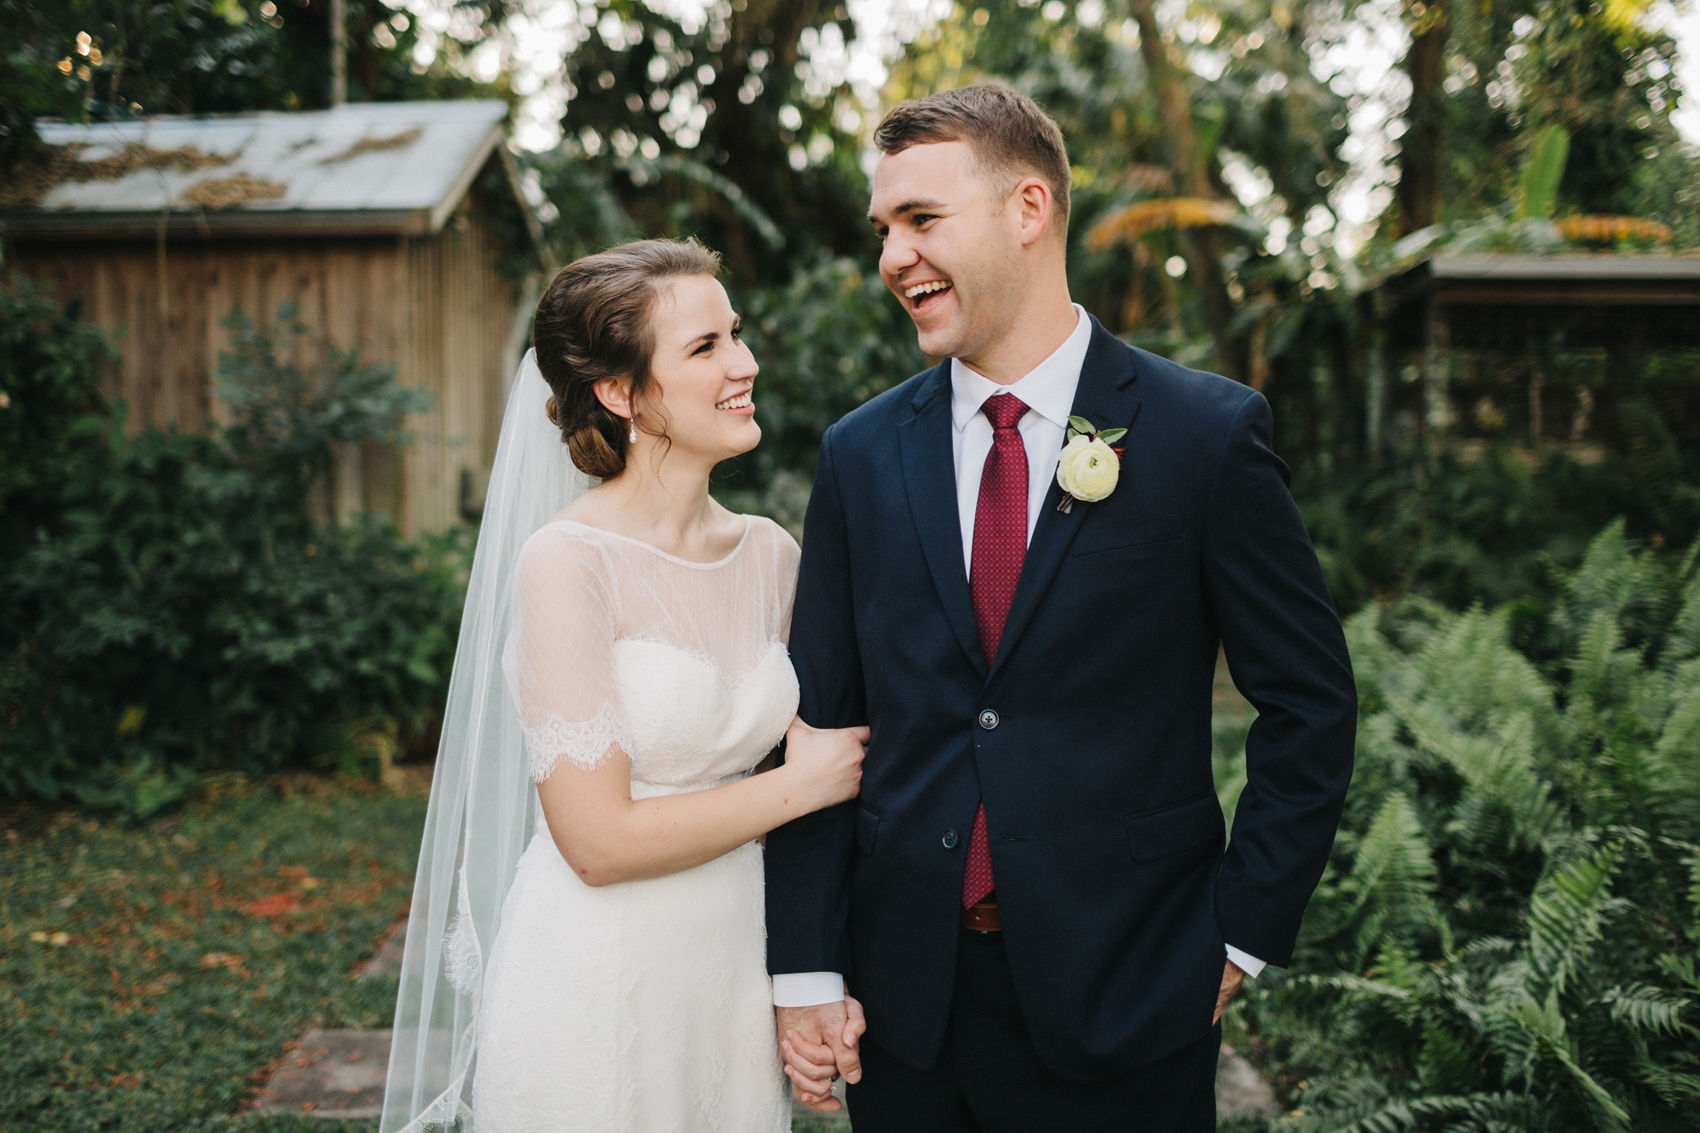 groom wearing a burgundy tie and laughing with his bride in the garden at their outdoor ceremony in the garden near Orlando, Florida by Florida wedding photographer